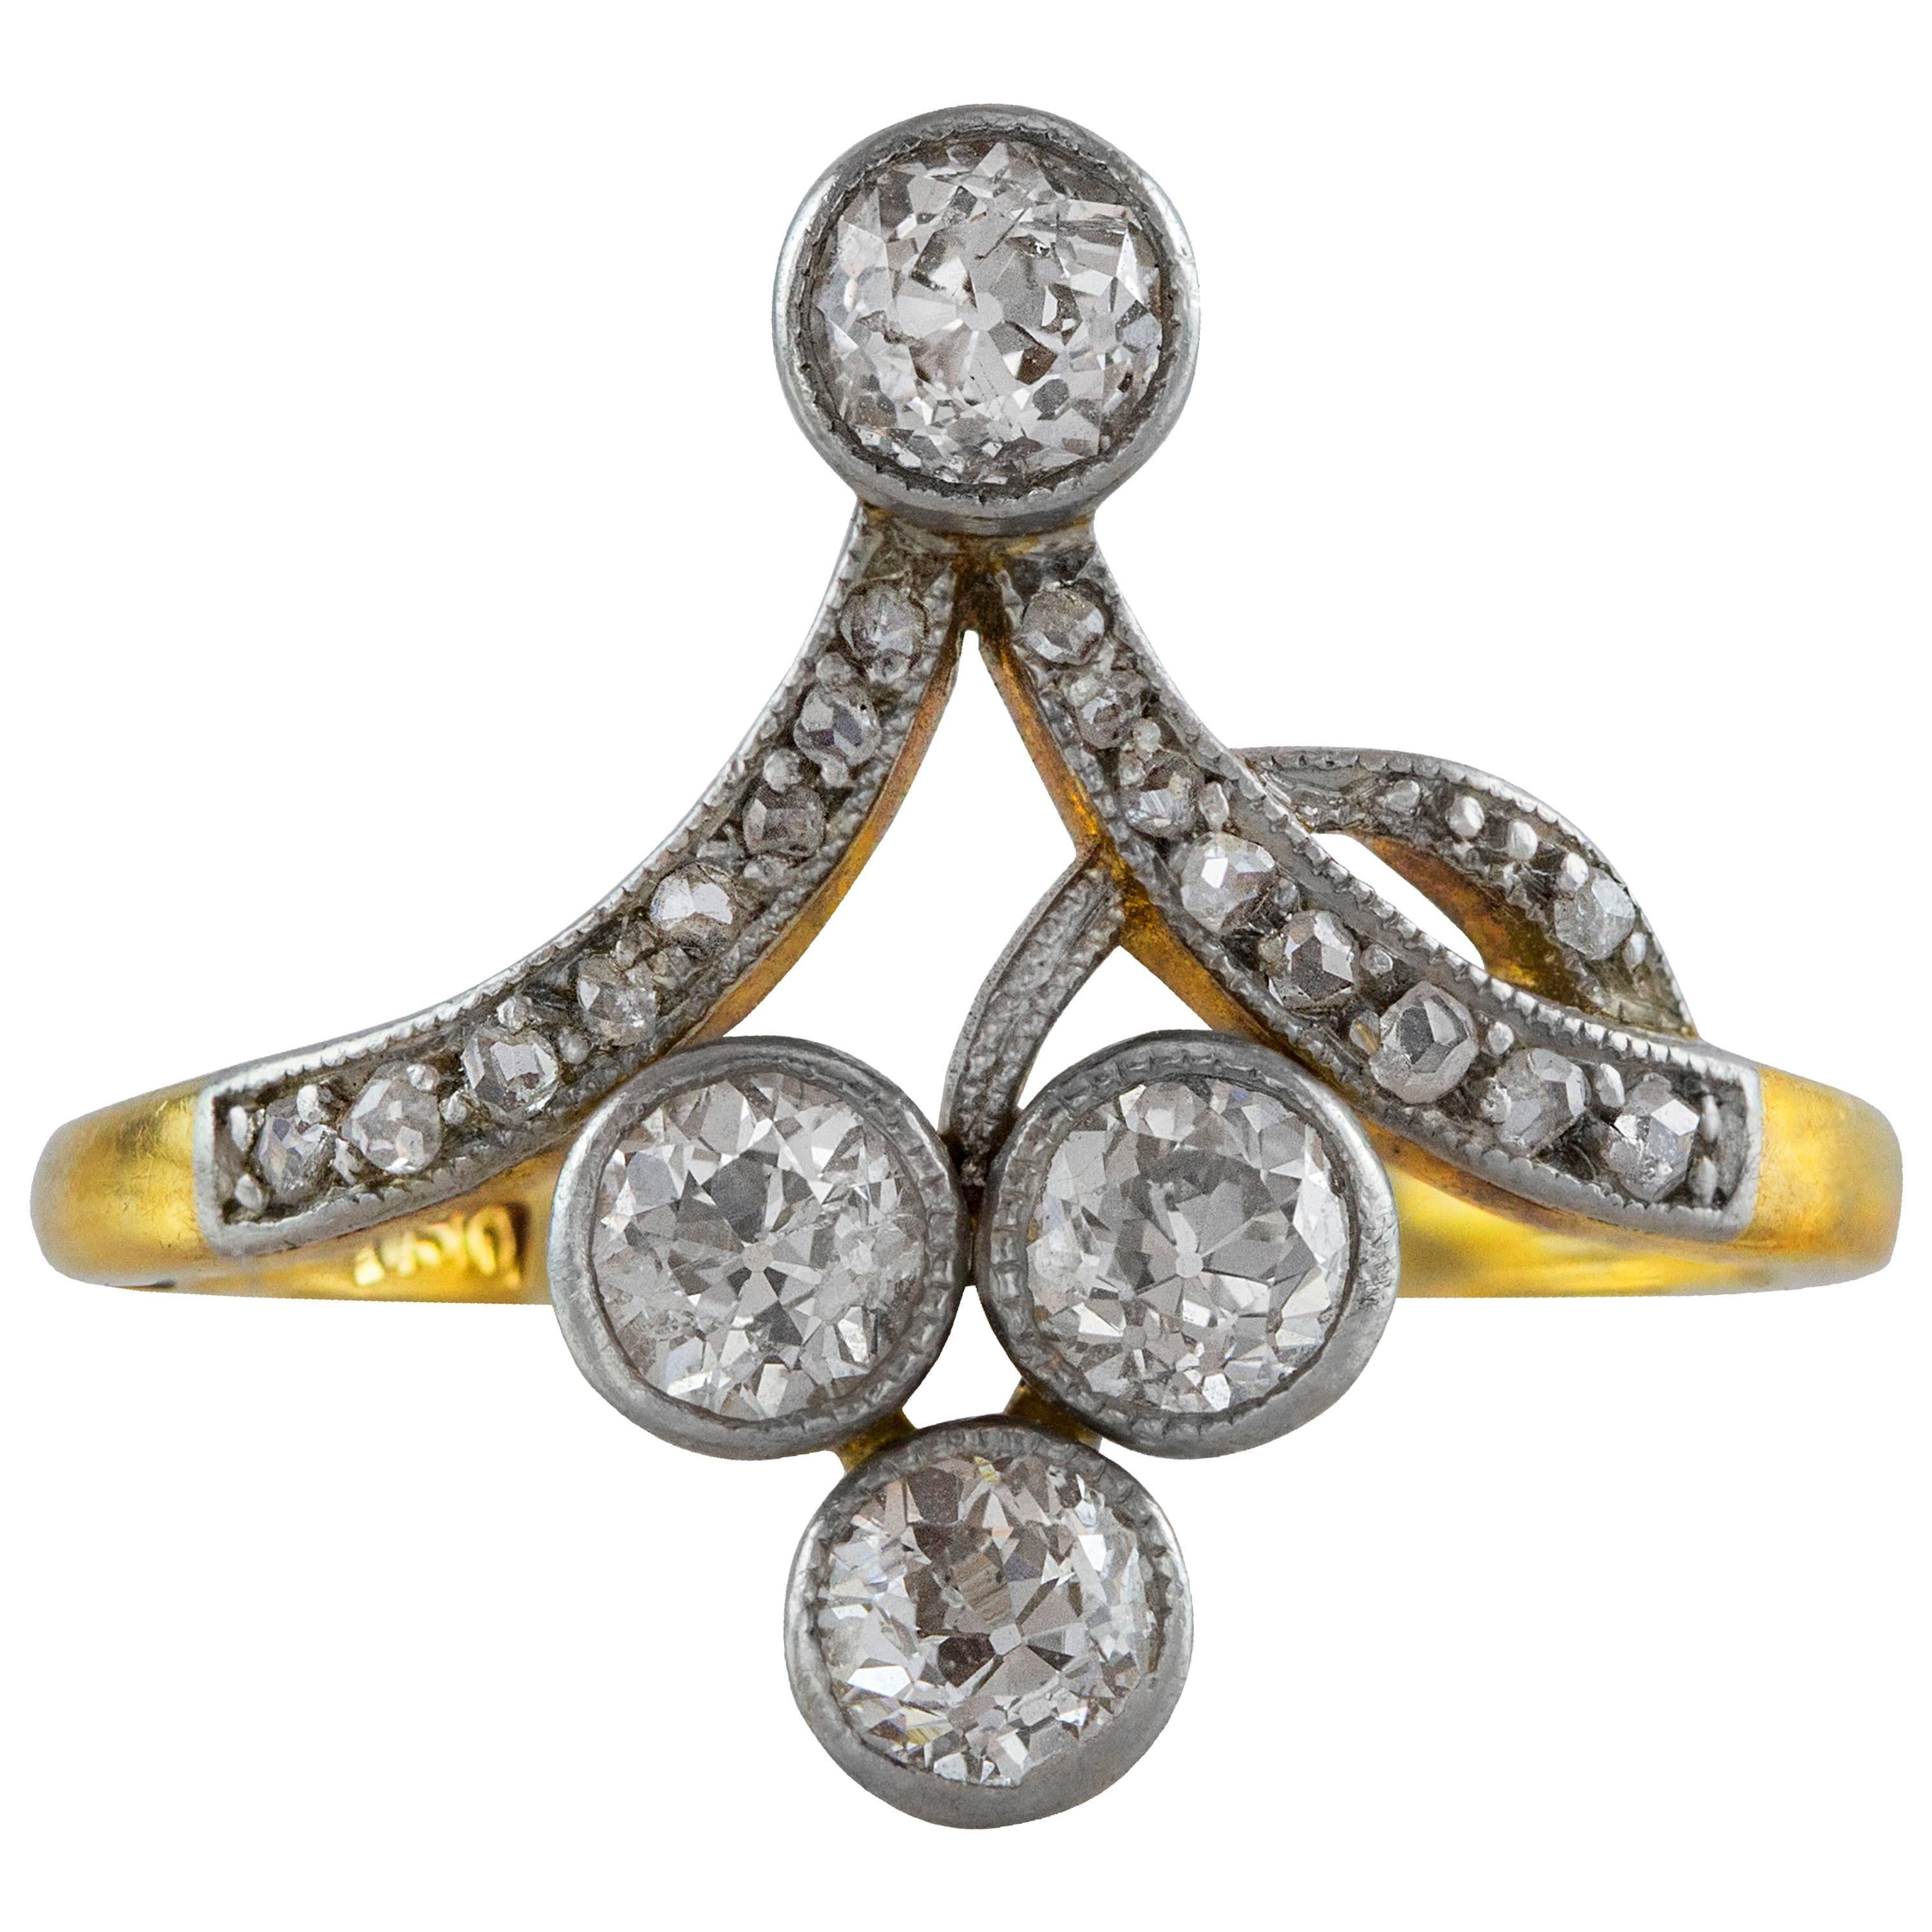 This antique ring features 4 Old European diamonds and smaller single cut diamonds in an intricate design. The weight of the diamonds is approximately 0.78 carats total. Finely made in 18K yellow gold. Size 5.75 US.